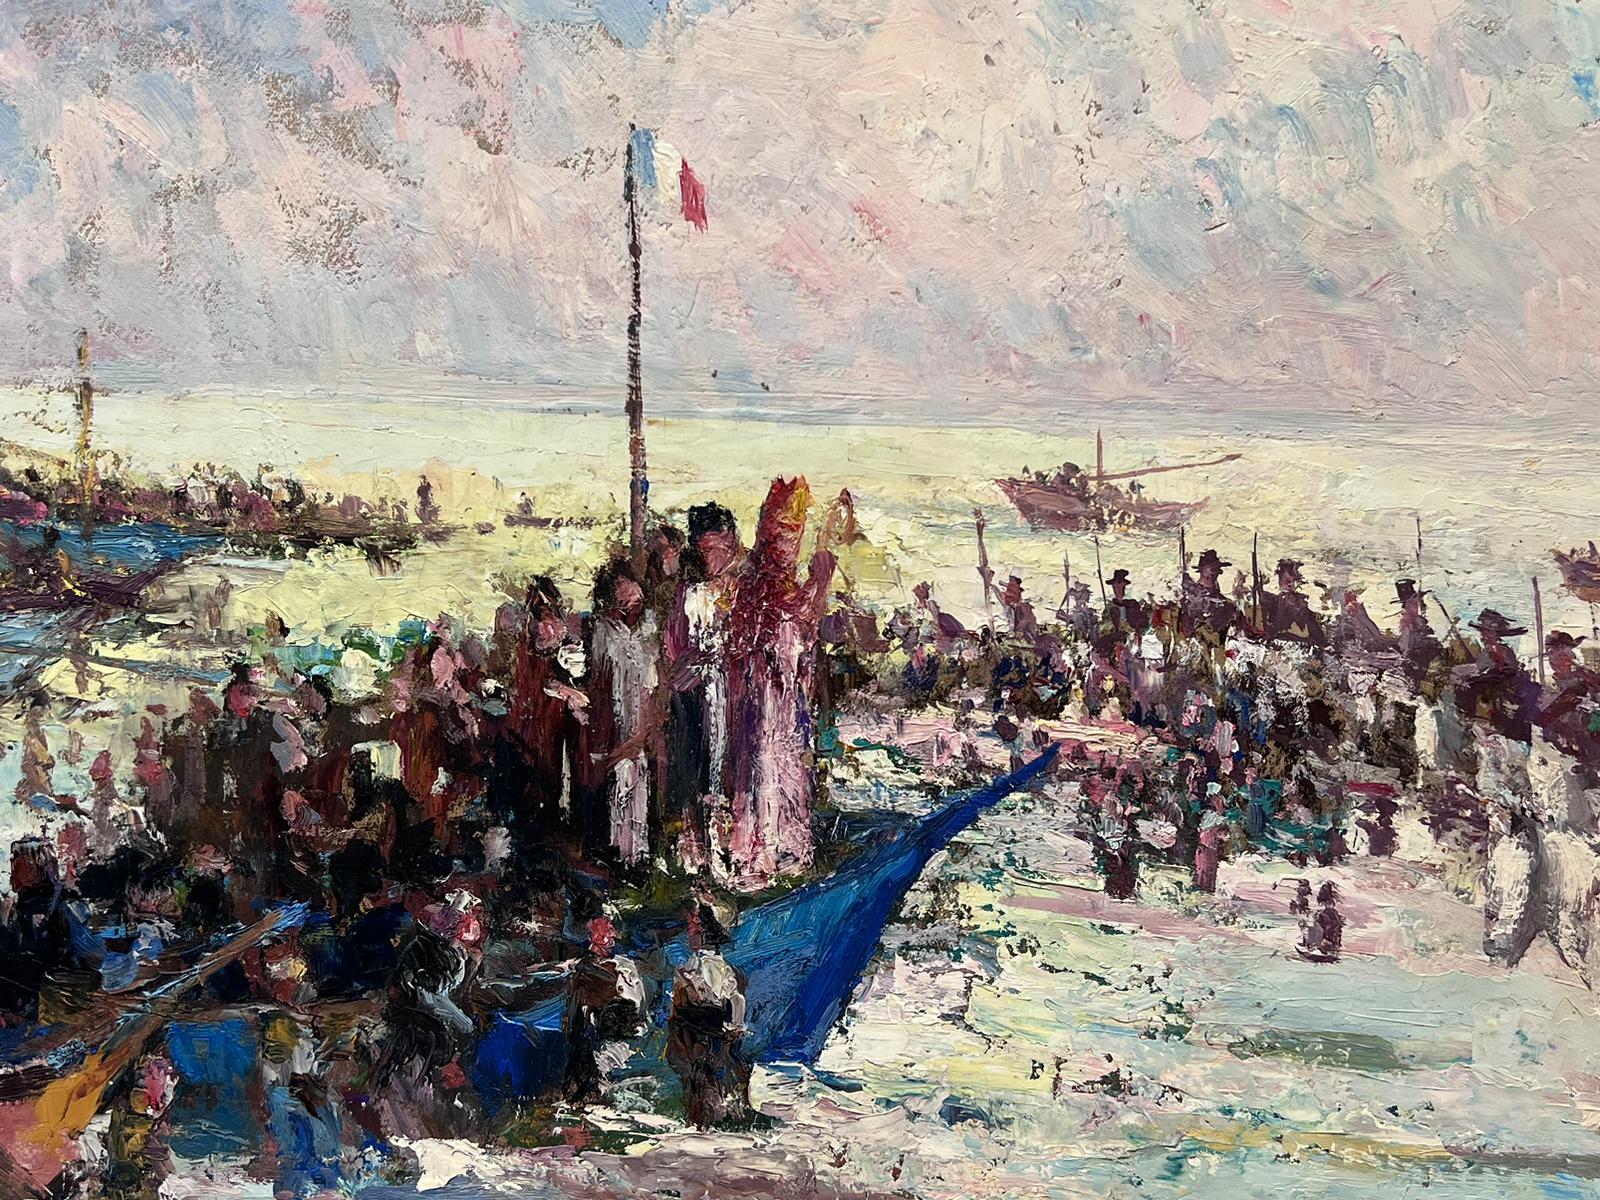 Artist/ School: Leon Hatot (French 1883-1953)

Title: Impressionist oil painting 

Medium: signed oil painting on thick paper, stuck on board unframed.
dated 1939

Size: signed painting: 13 x 20 inches

Provenance: all the paintings we have for sale